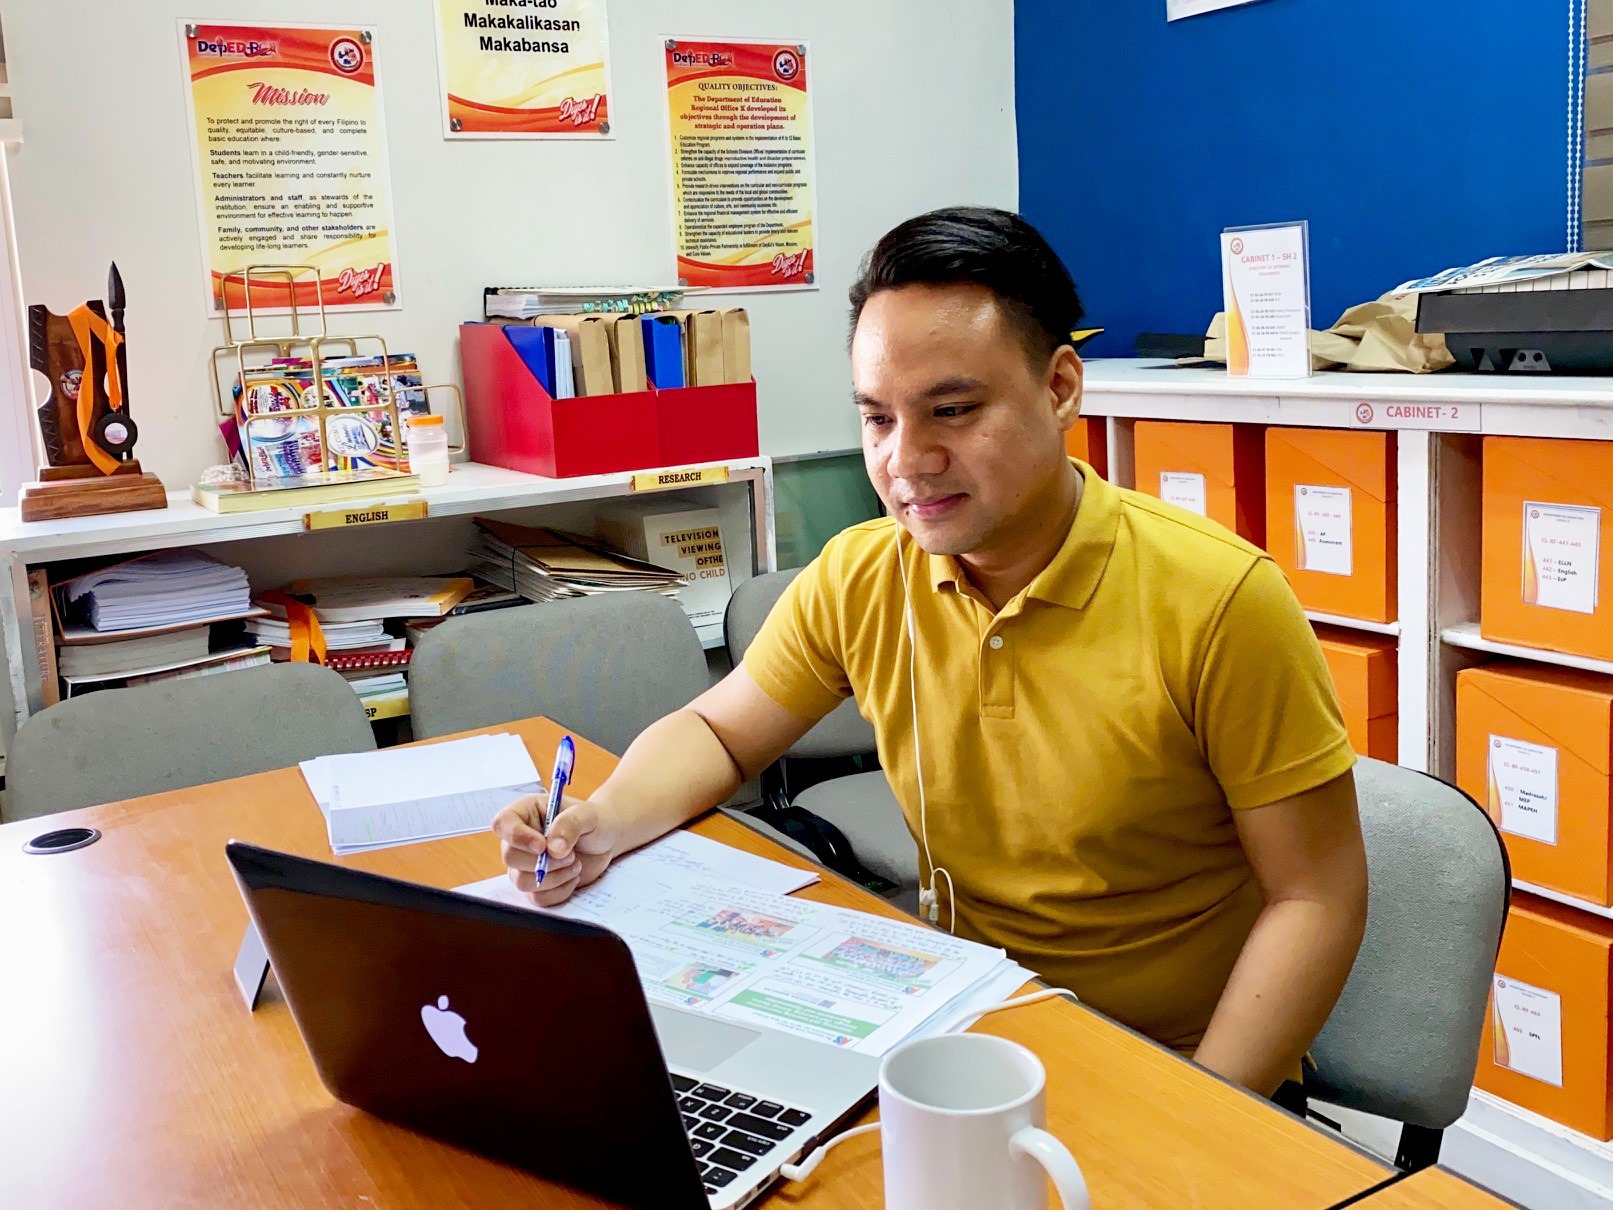 Smart-backed Dynamic Learning Program to benefit DepEd ALS Butuan’s “second-chance” learners